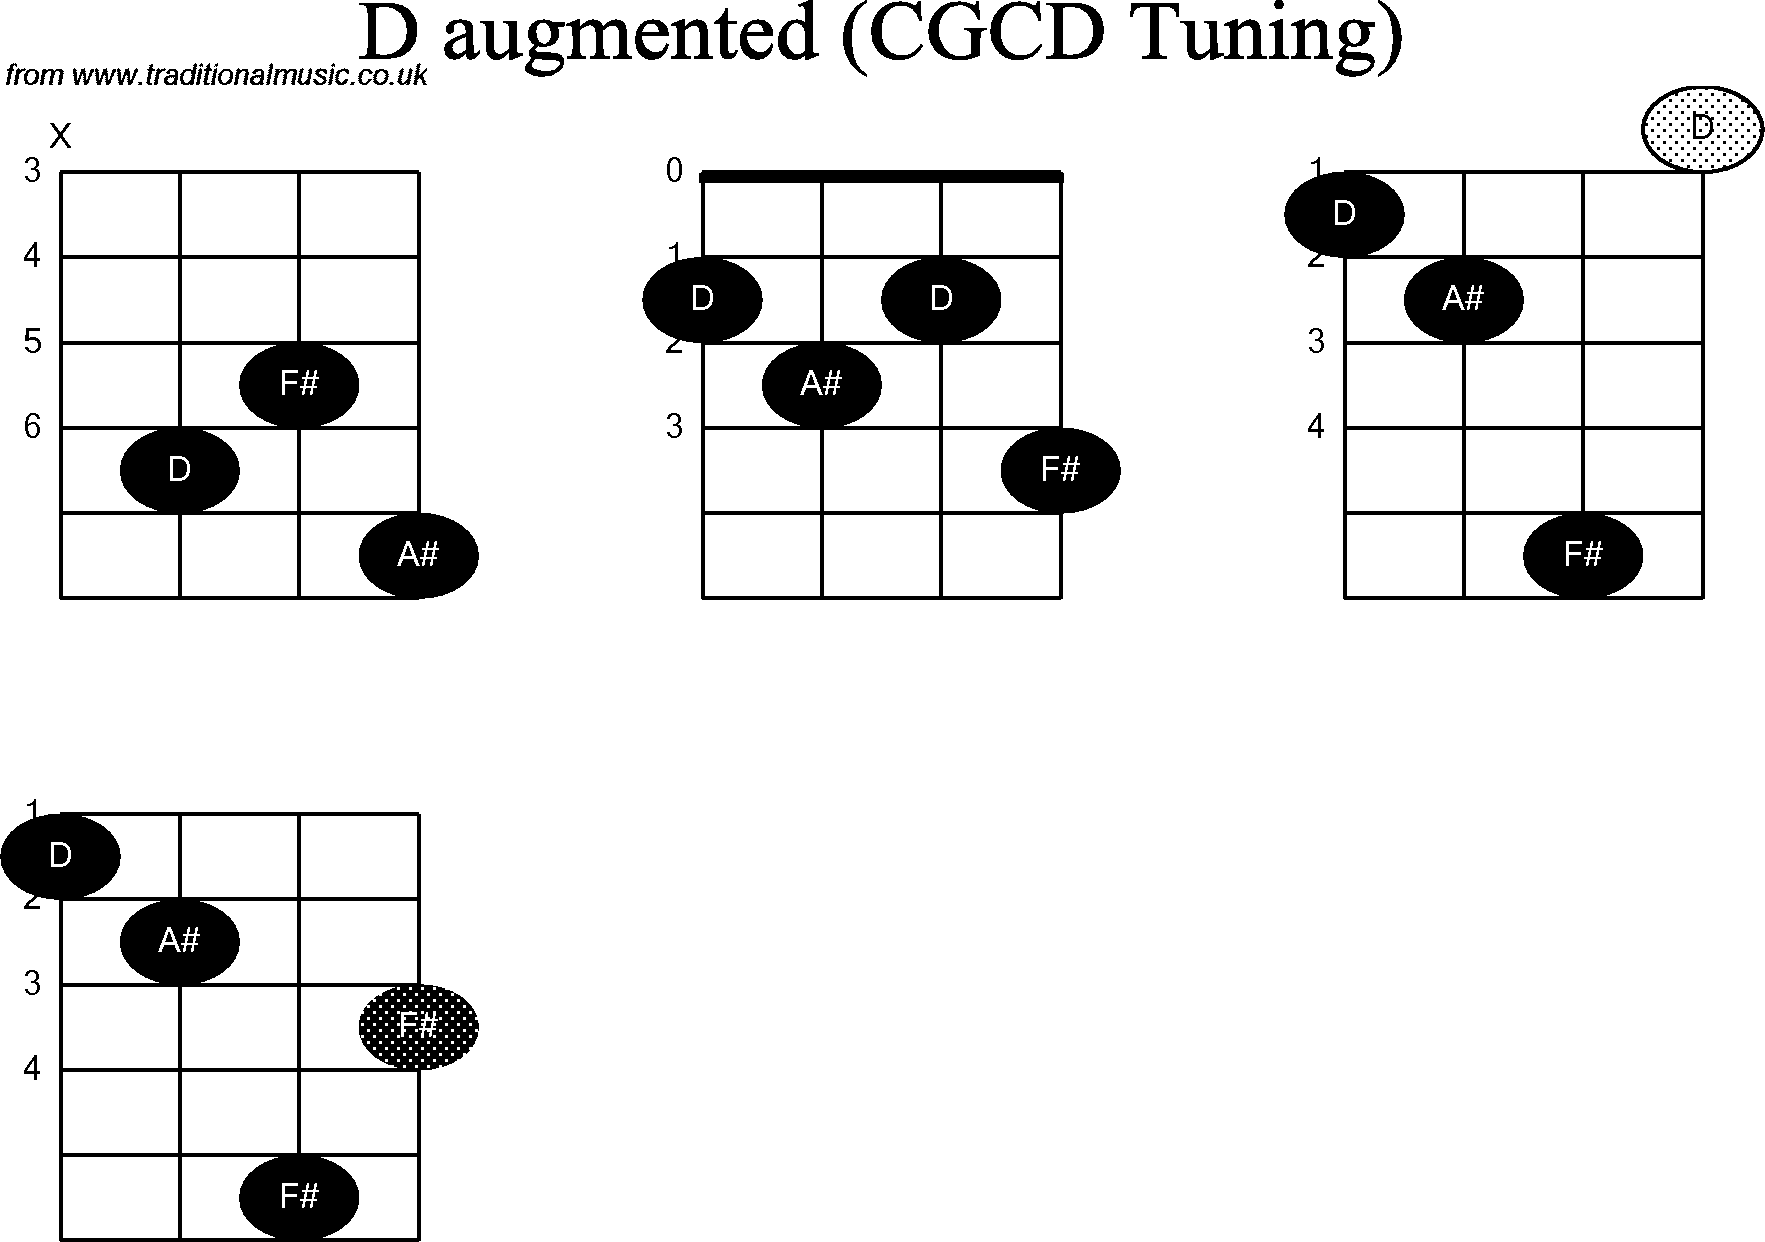 Chord diagrams for Banjo(Double C) D Augmented